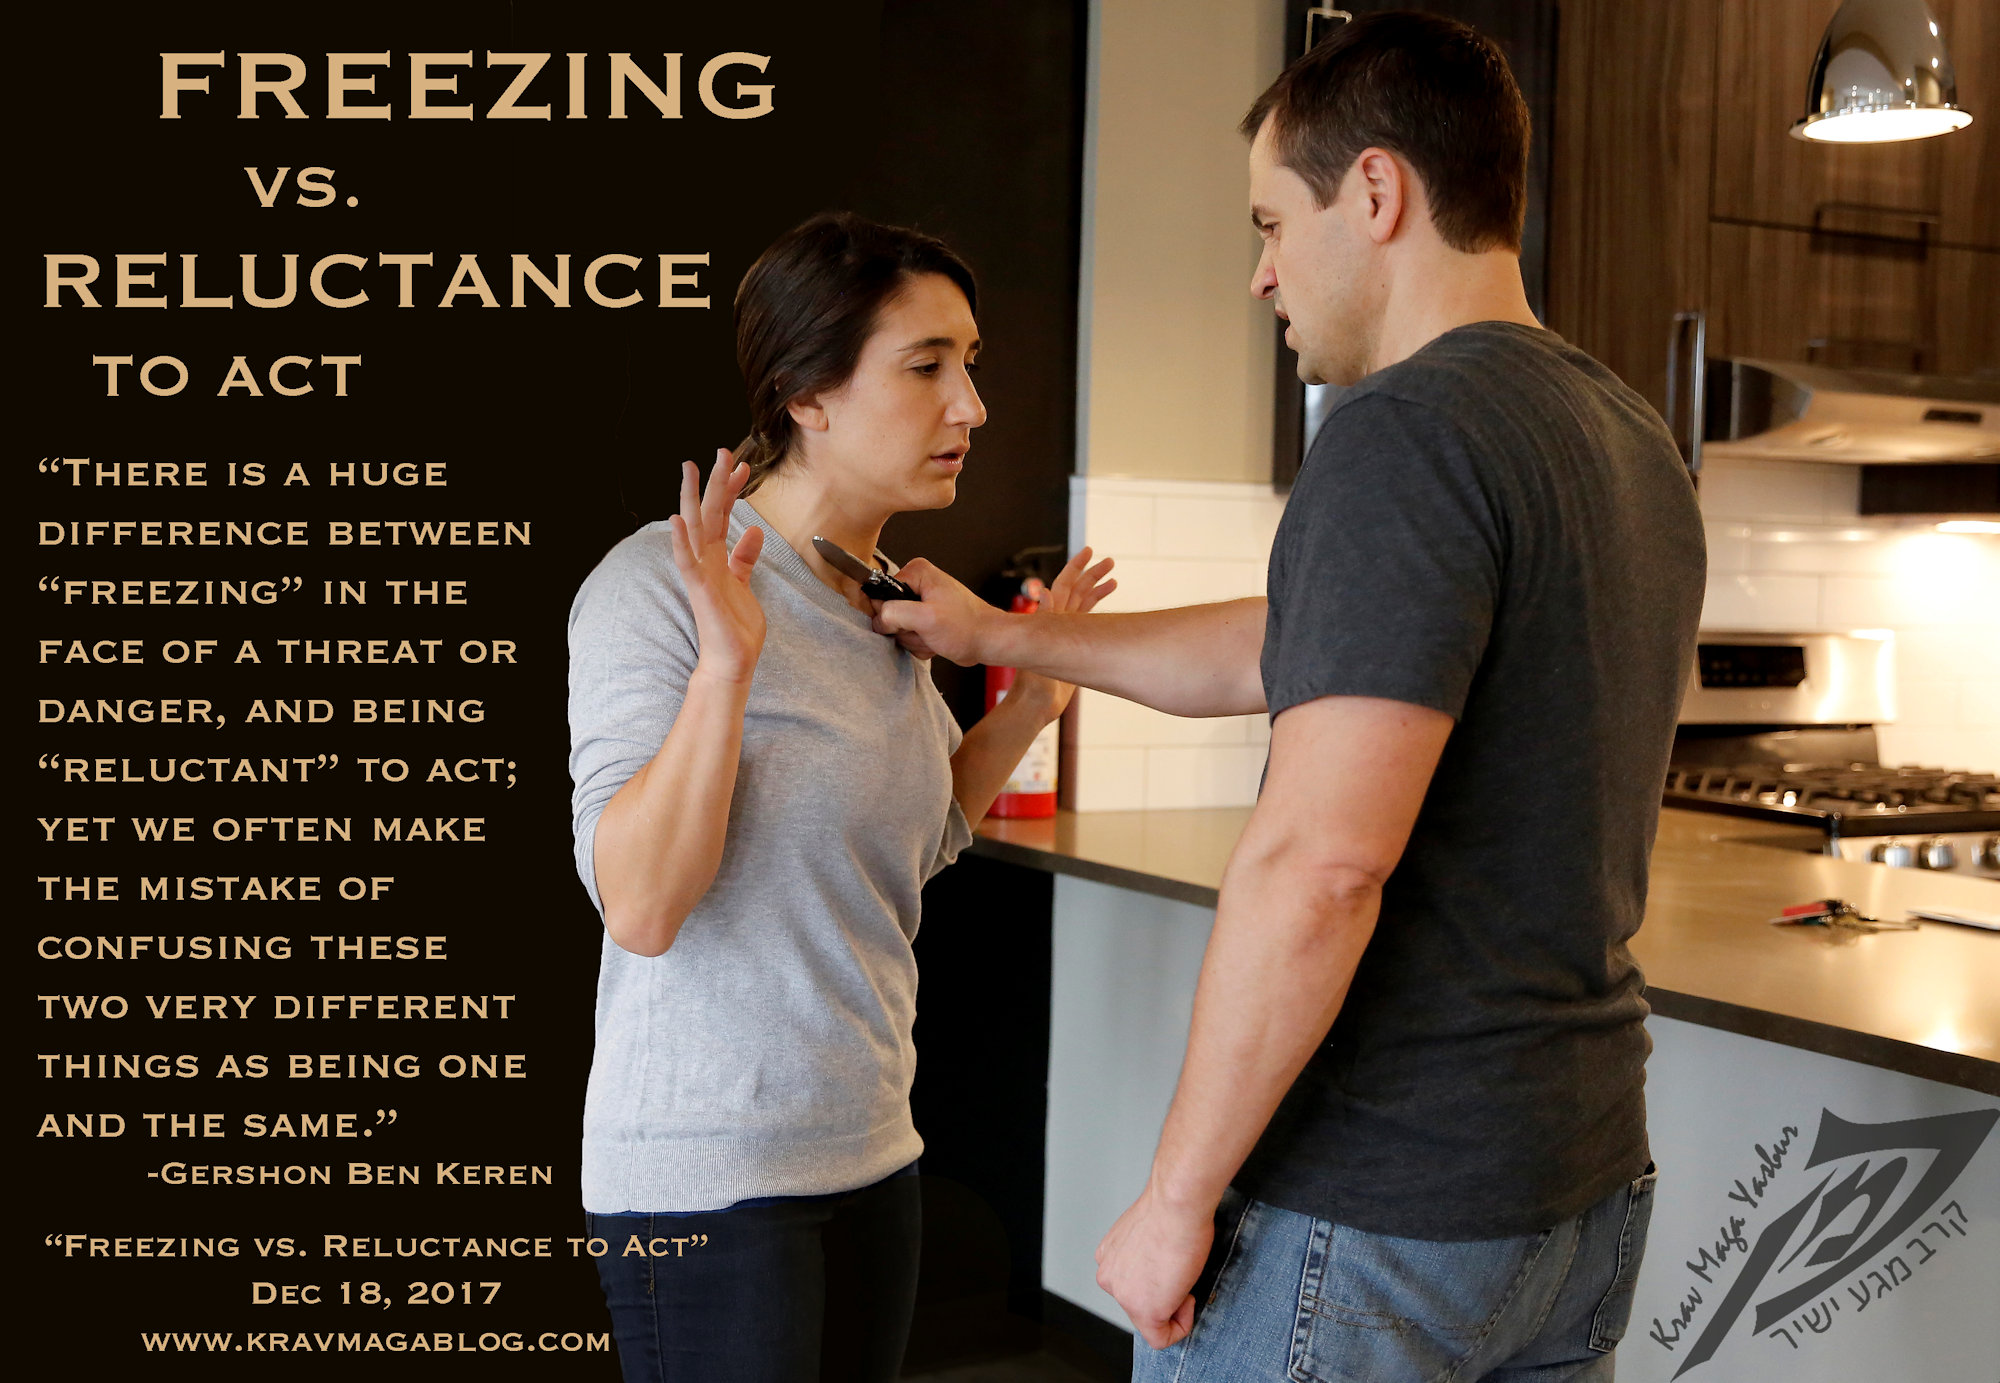 Blog About Freezing Vs Reluctance To Act (Part 1)